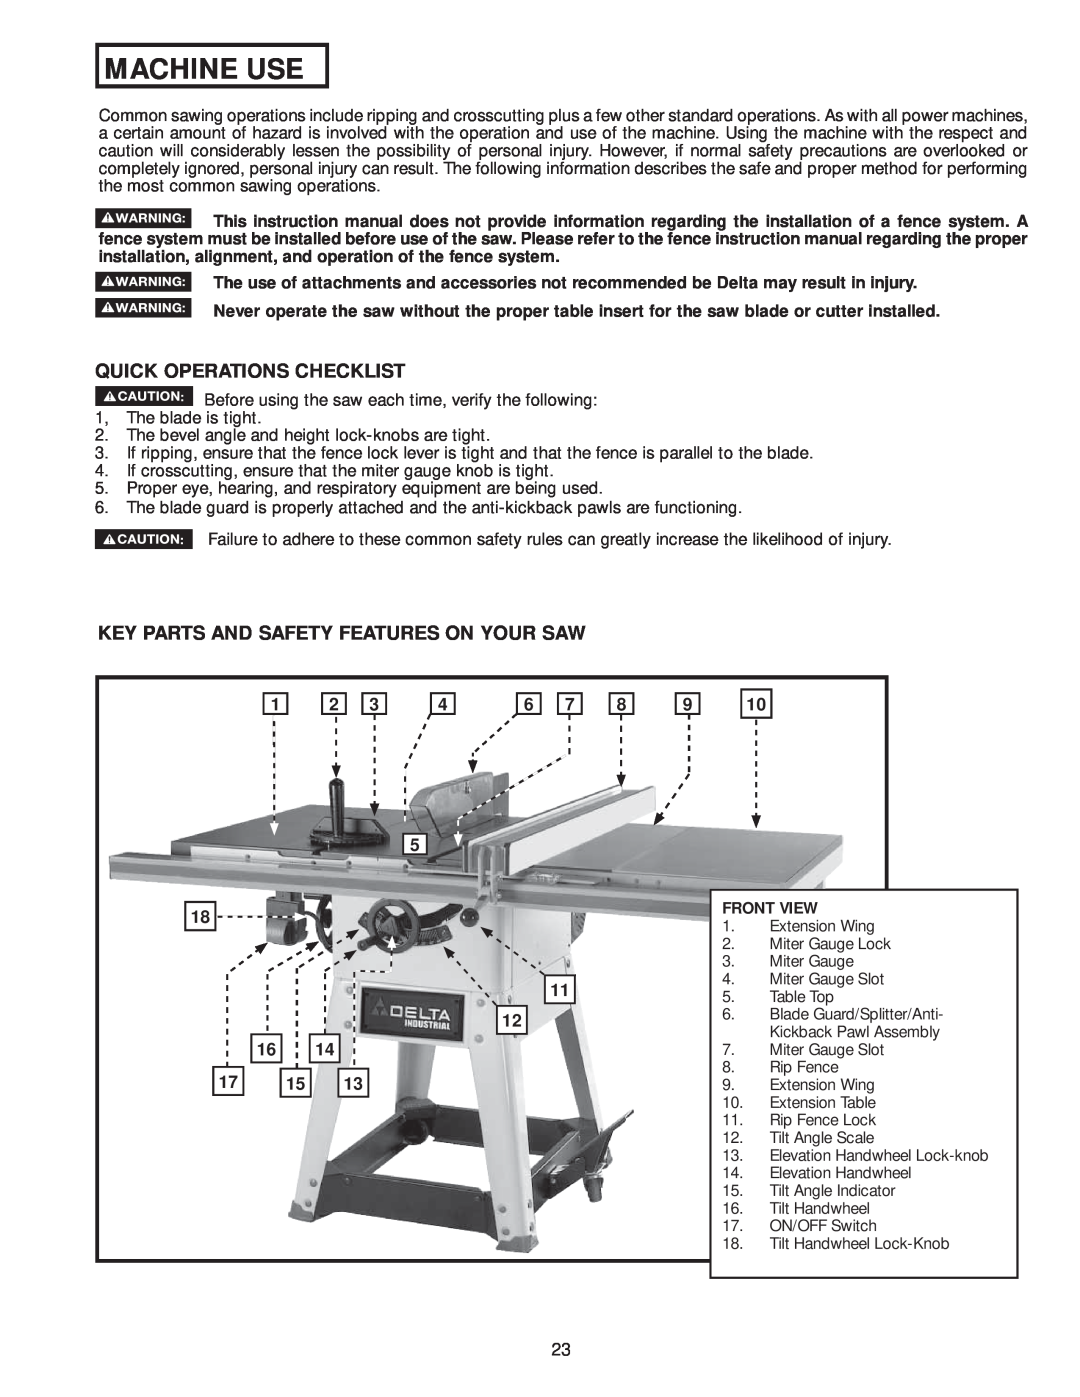 Delta 36-978, 36-979 instruction manual Machine Use, Quick Operations Checklist, Key Parts And Safety Features On Your Saw 